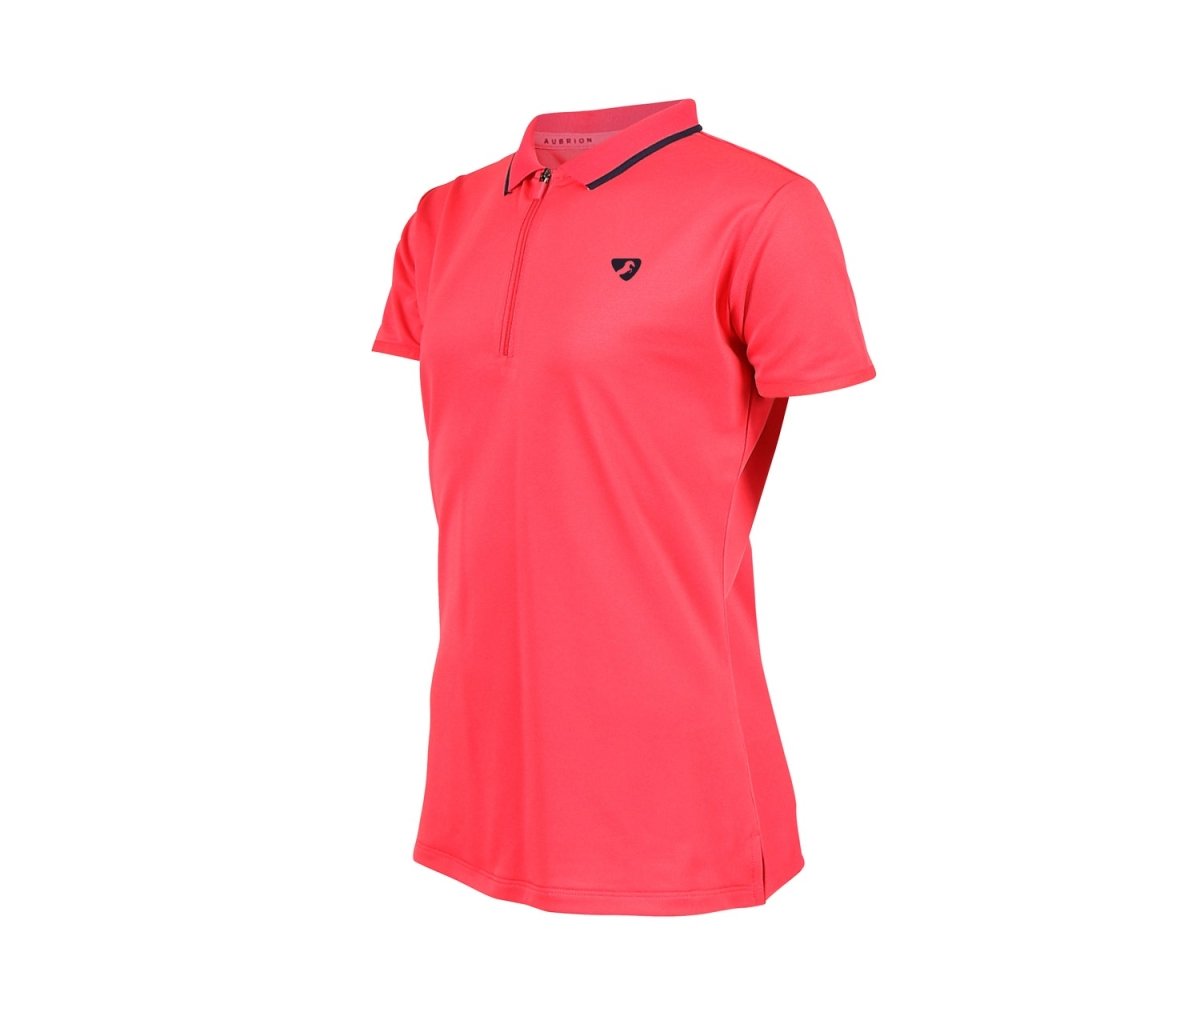 Aubrion SS24 Poise Tech Polo - Young Rider - Coral - 11/12 Years